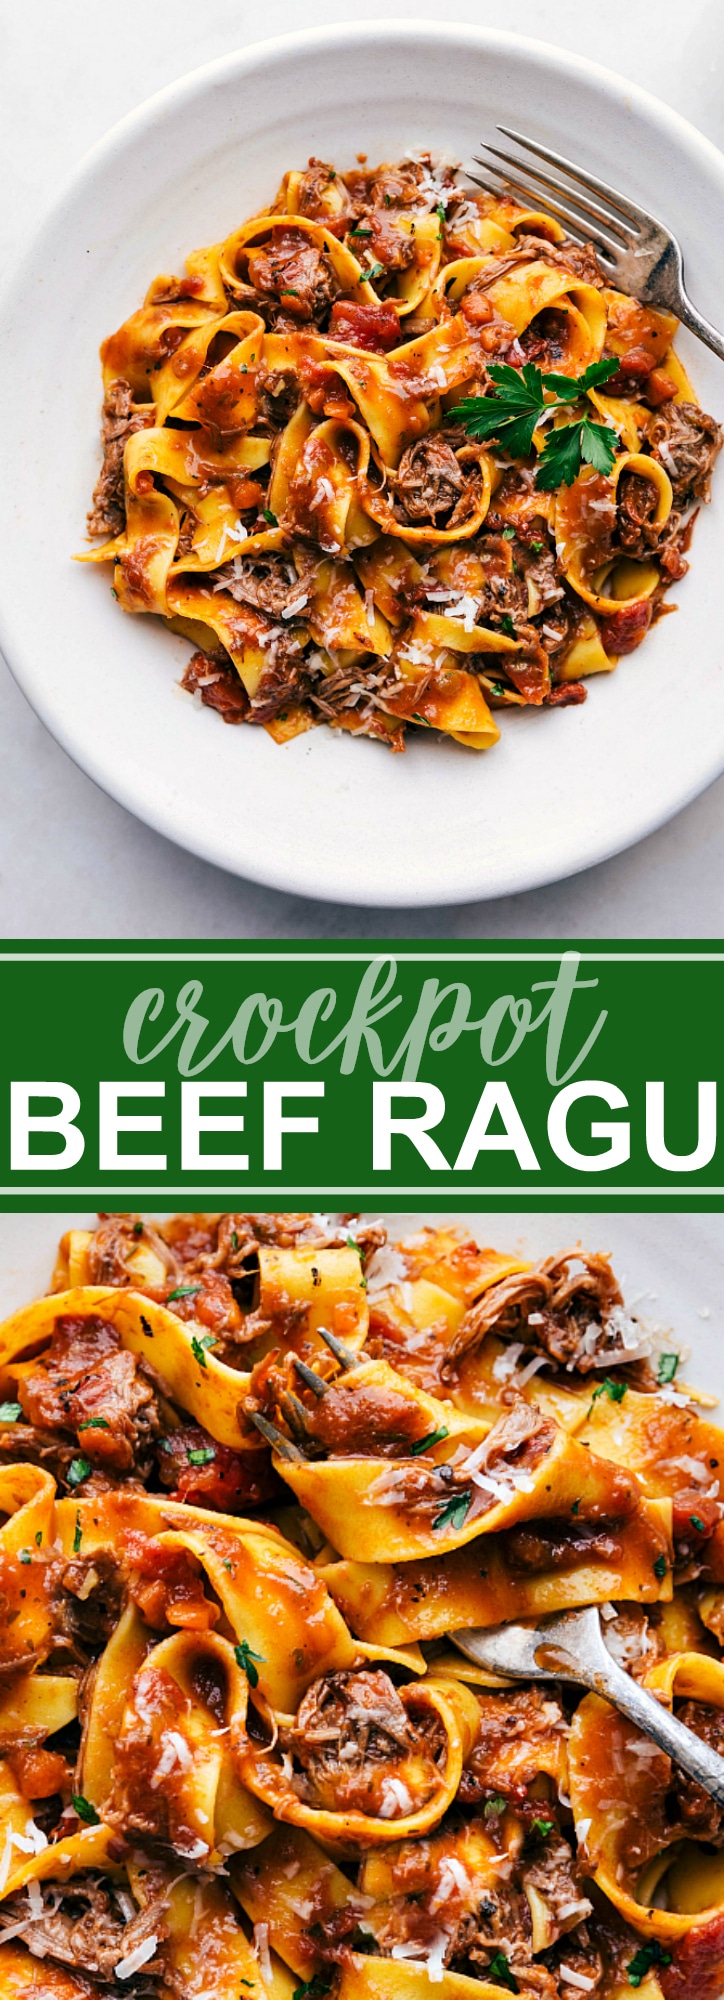 Beef ragu made in the crockpot (slow cooker) and served over pappardelle pasta. Delicious Italian-inspired cold weather comfort food. via chelseasmessyapron.com #crockpot #meal #recipe #easy #beef #ragu #red #meat #slow #cooker #pappardelle #pasta